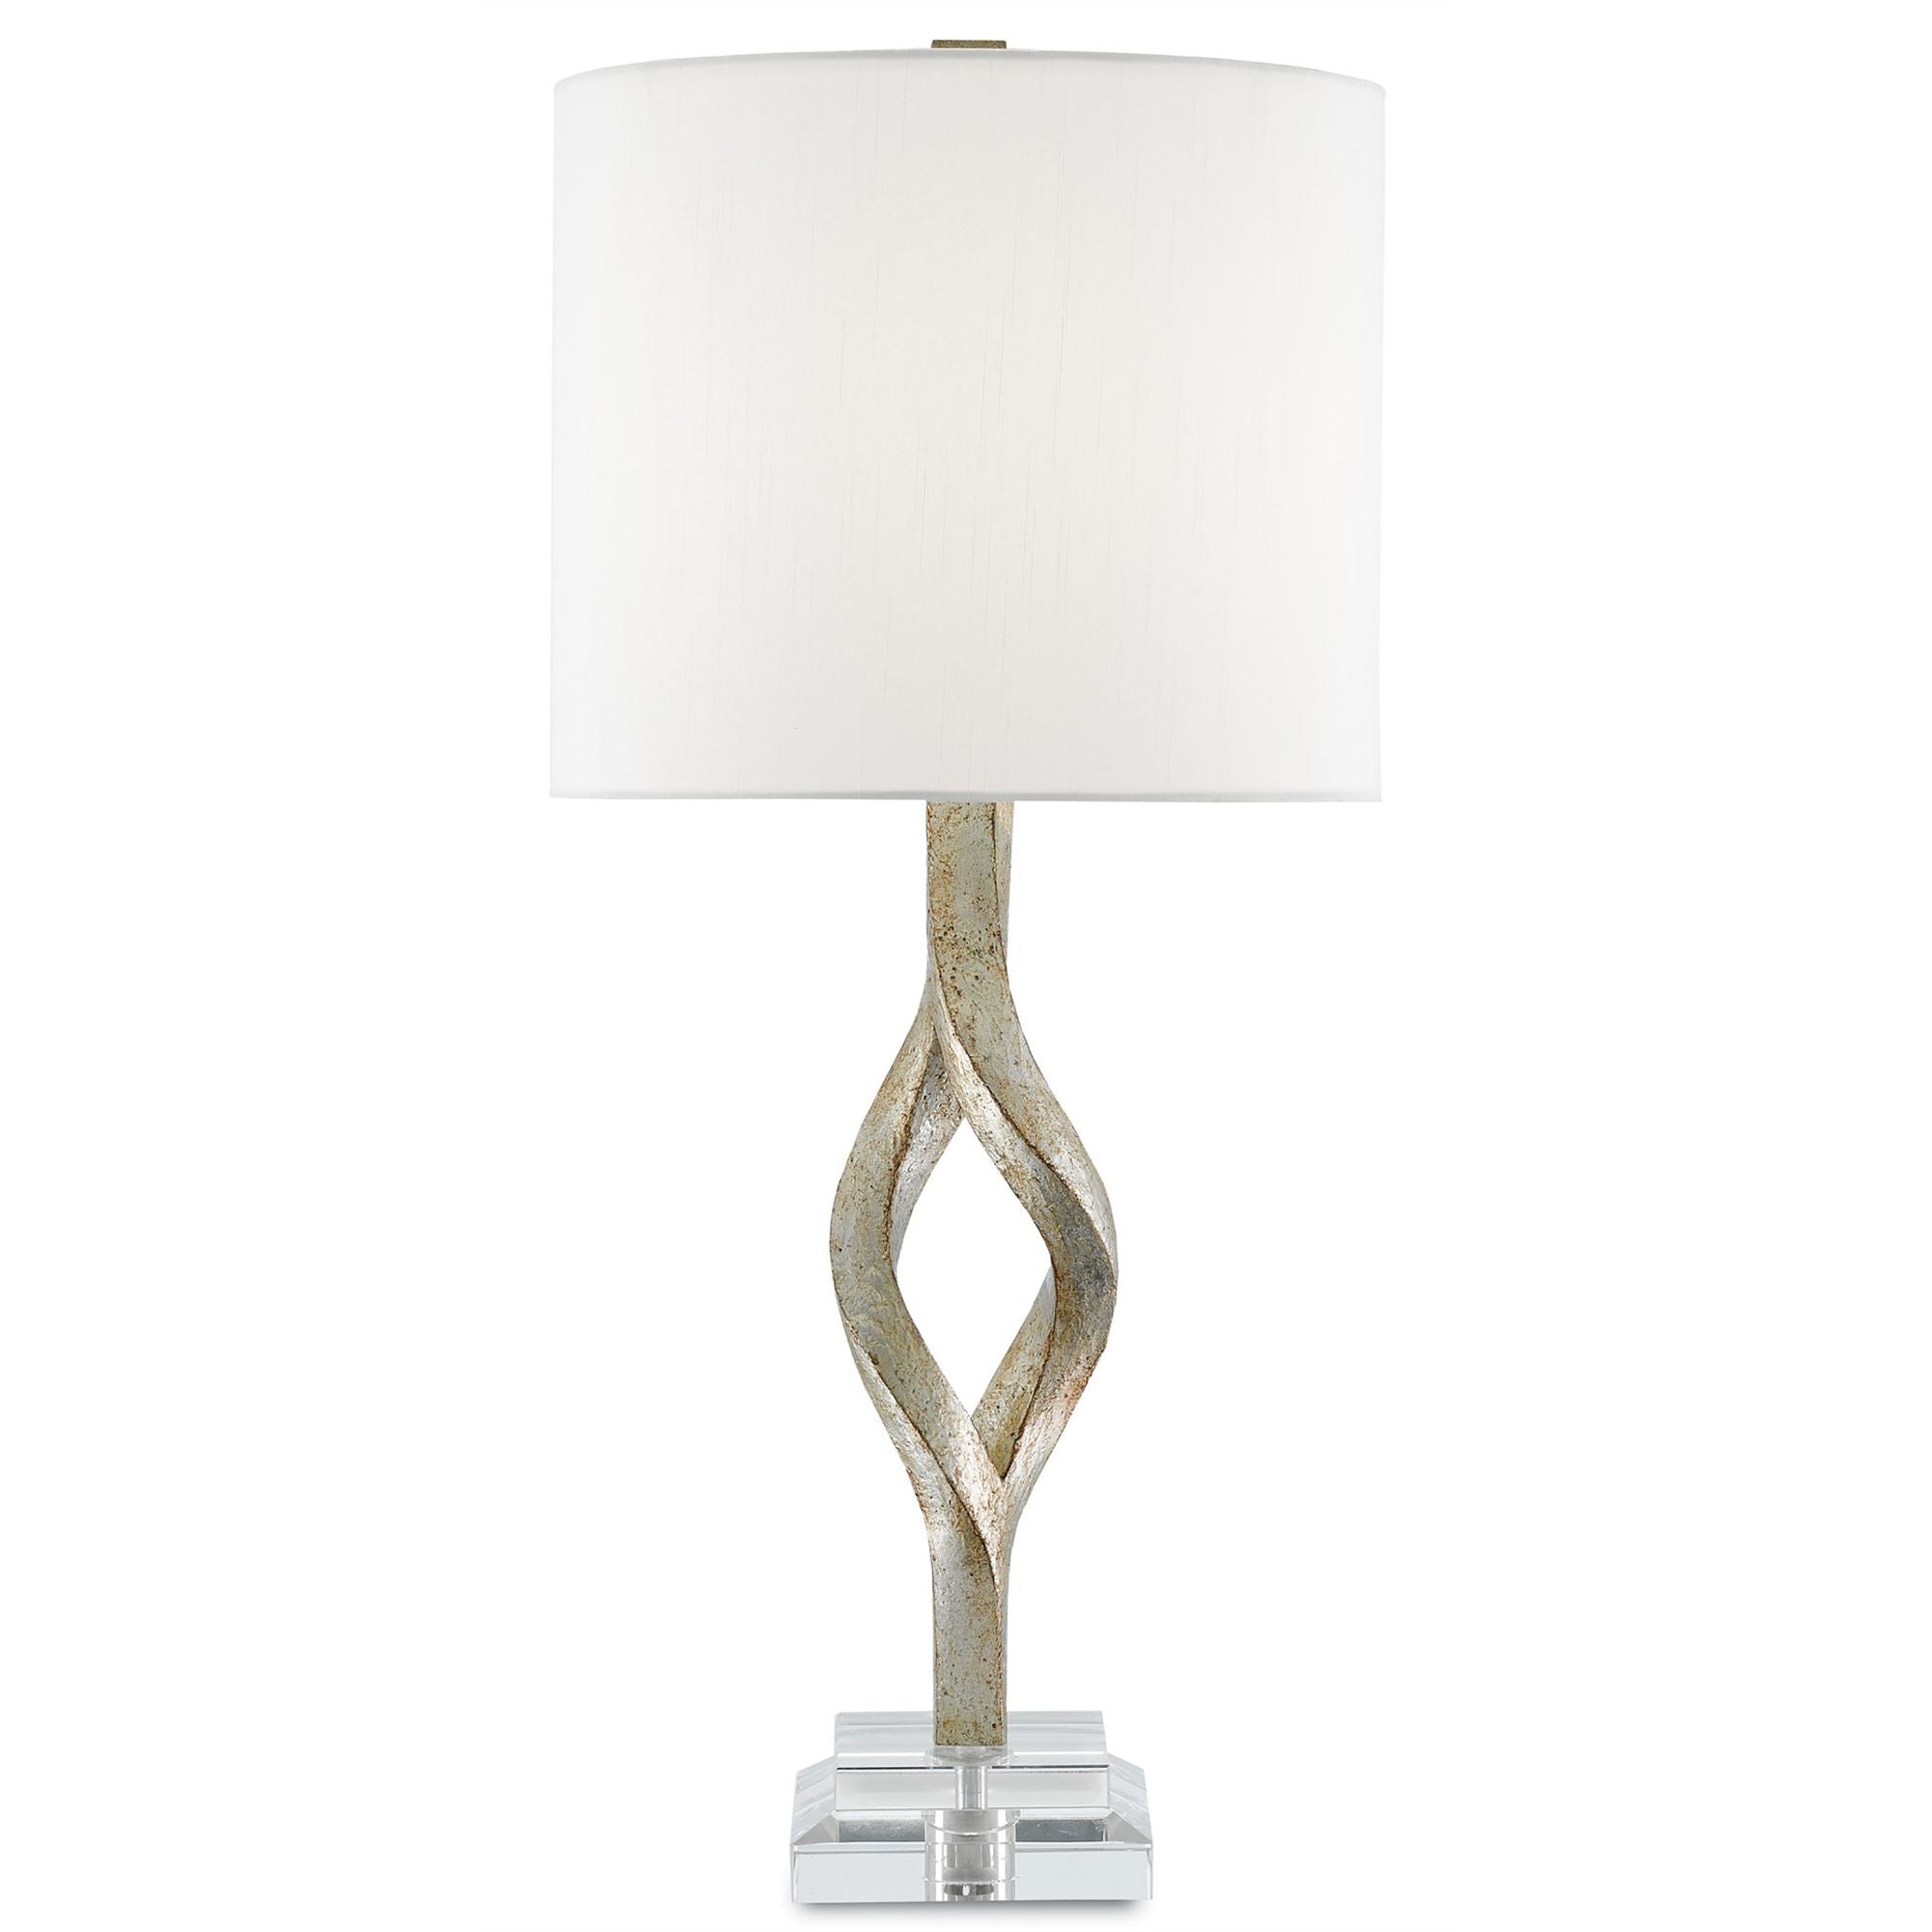 Elyx Silver Table Lamp - Chinois Silver Leaf